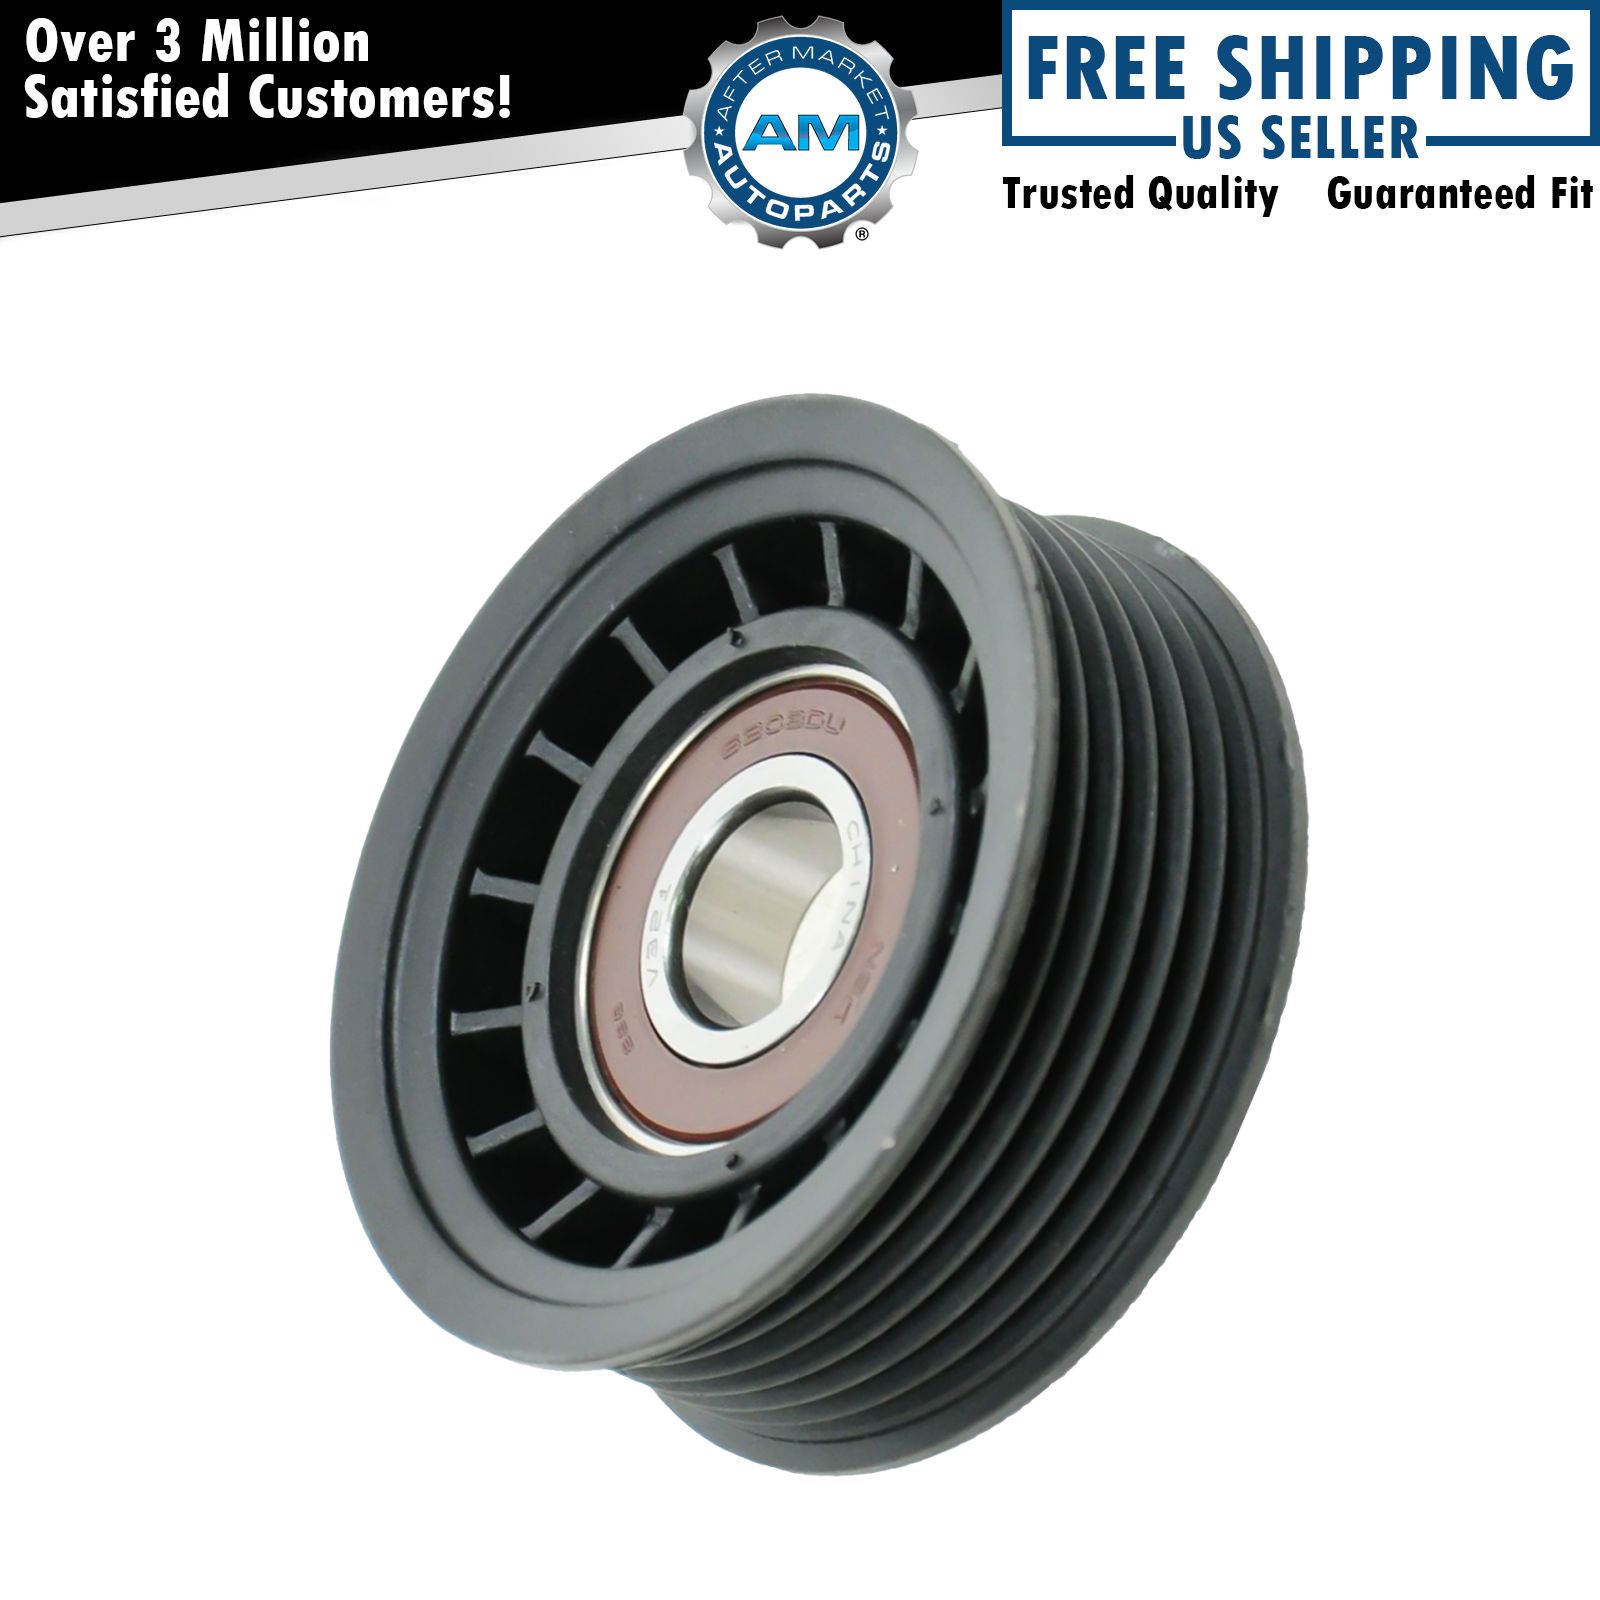 Serpentine Belt Idler Pulley Grooved for Chevy Ford Olds Pickup Truck Van SUV